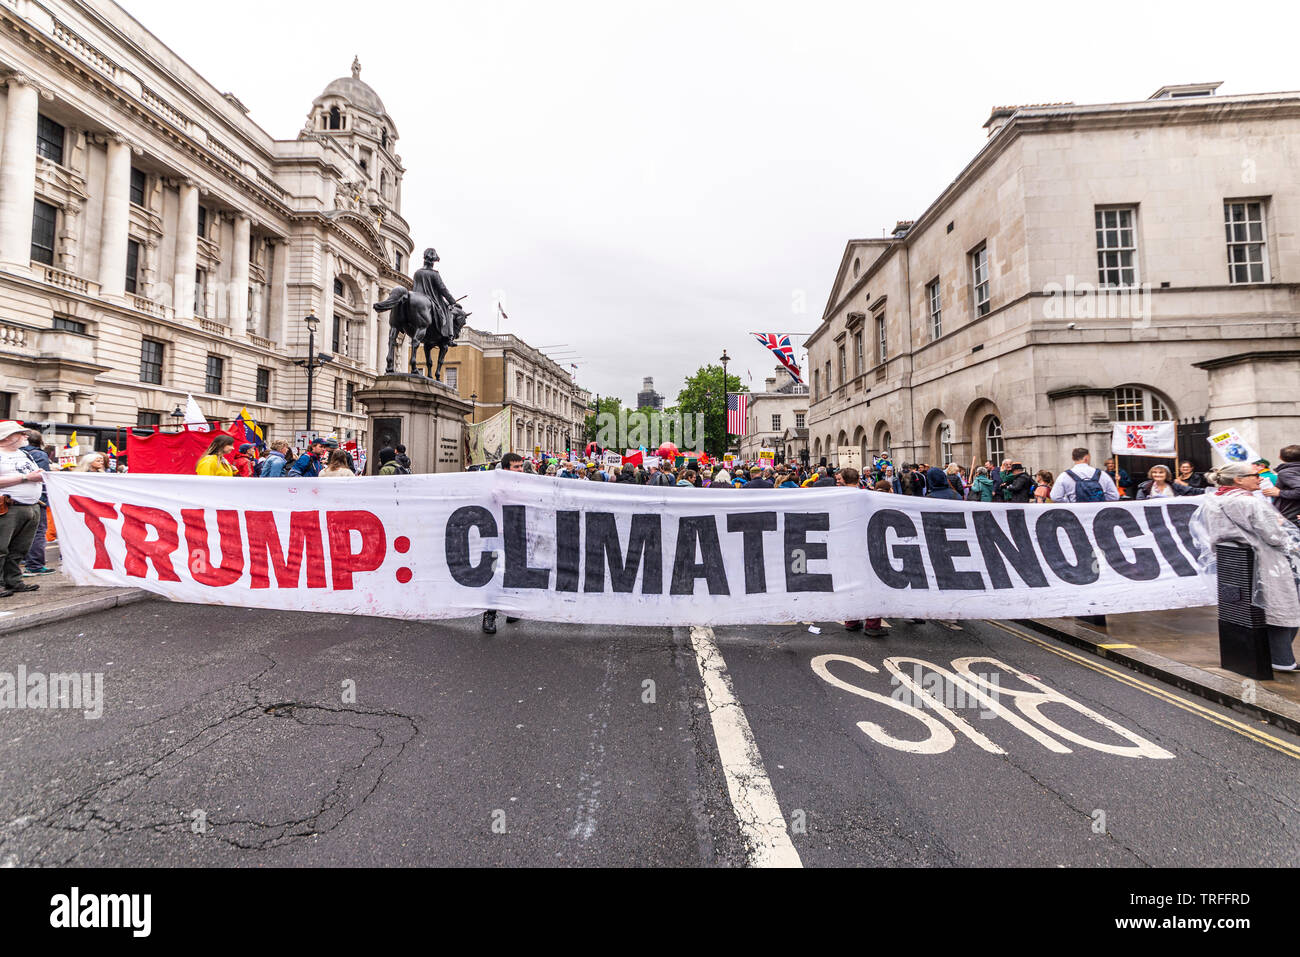 Trump climate genocide protest banner held by protesters during US President Donald Trump State Visit 2019. Whitehall, London, UK. Demonstration Stock Photo